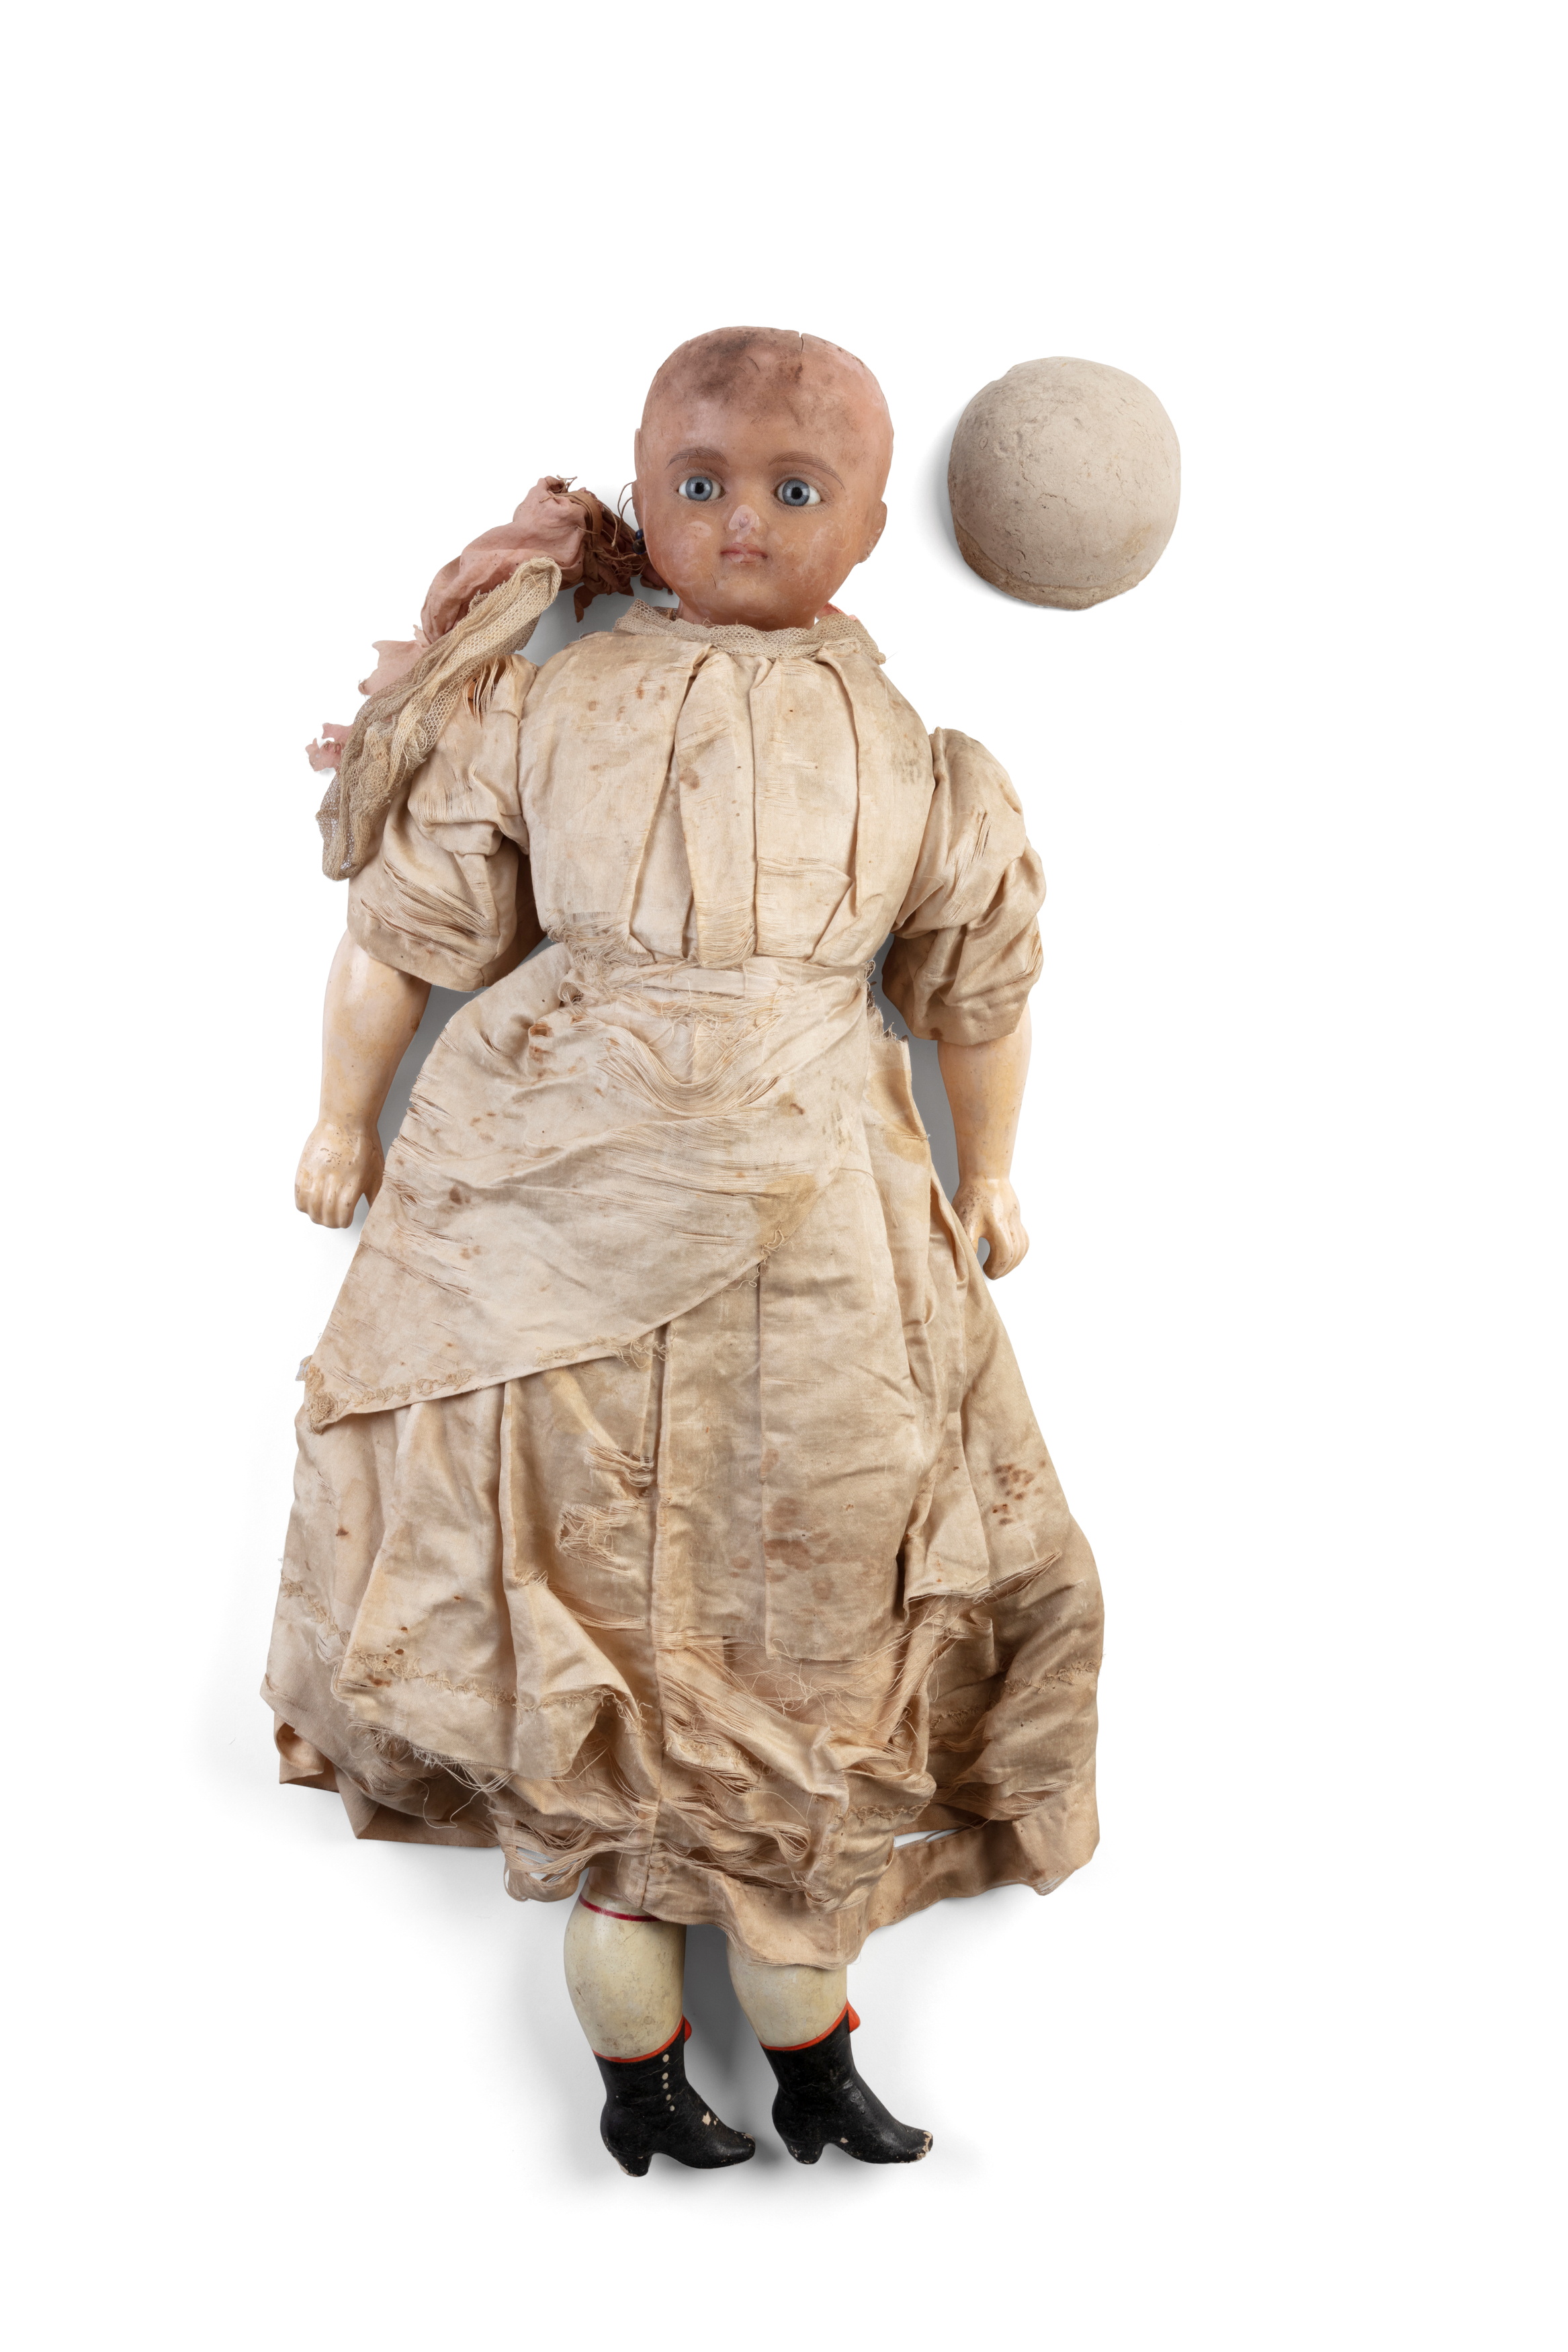 Late 19th century doll made in Germany